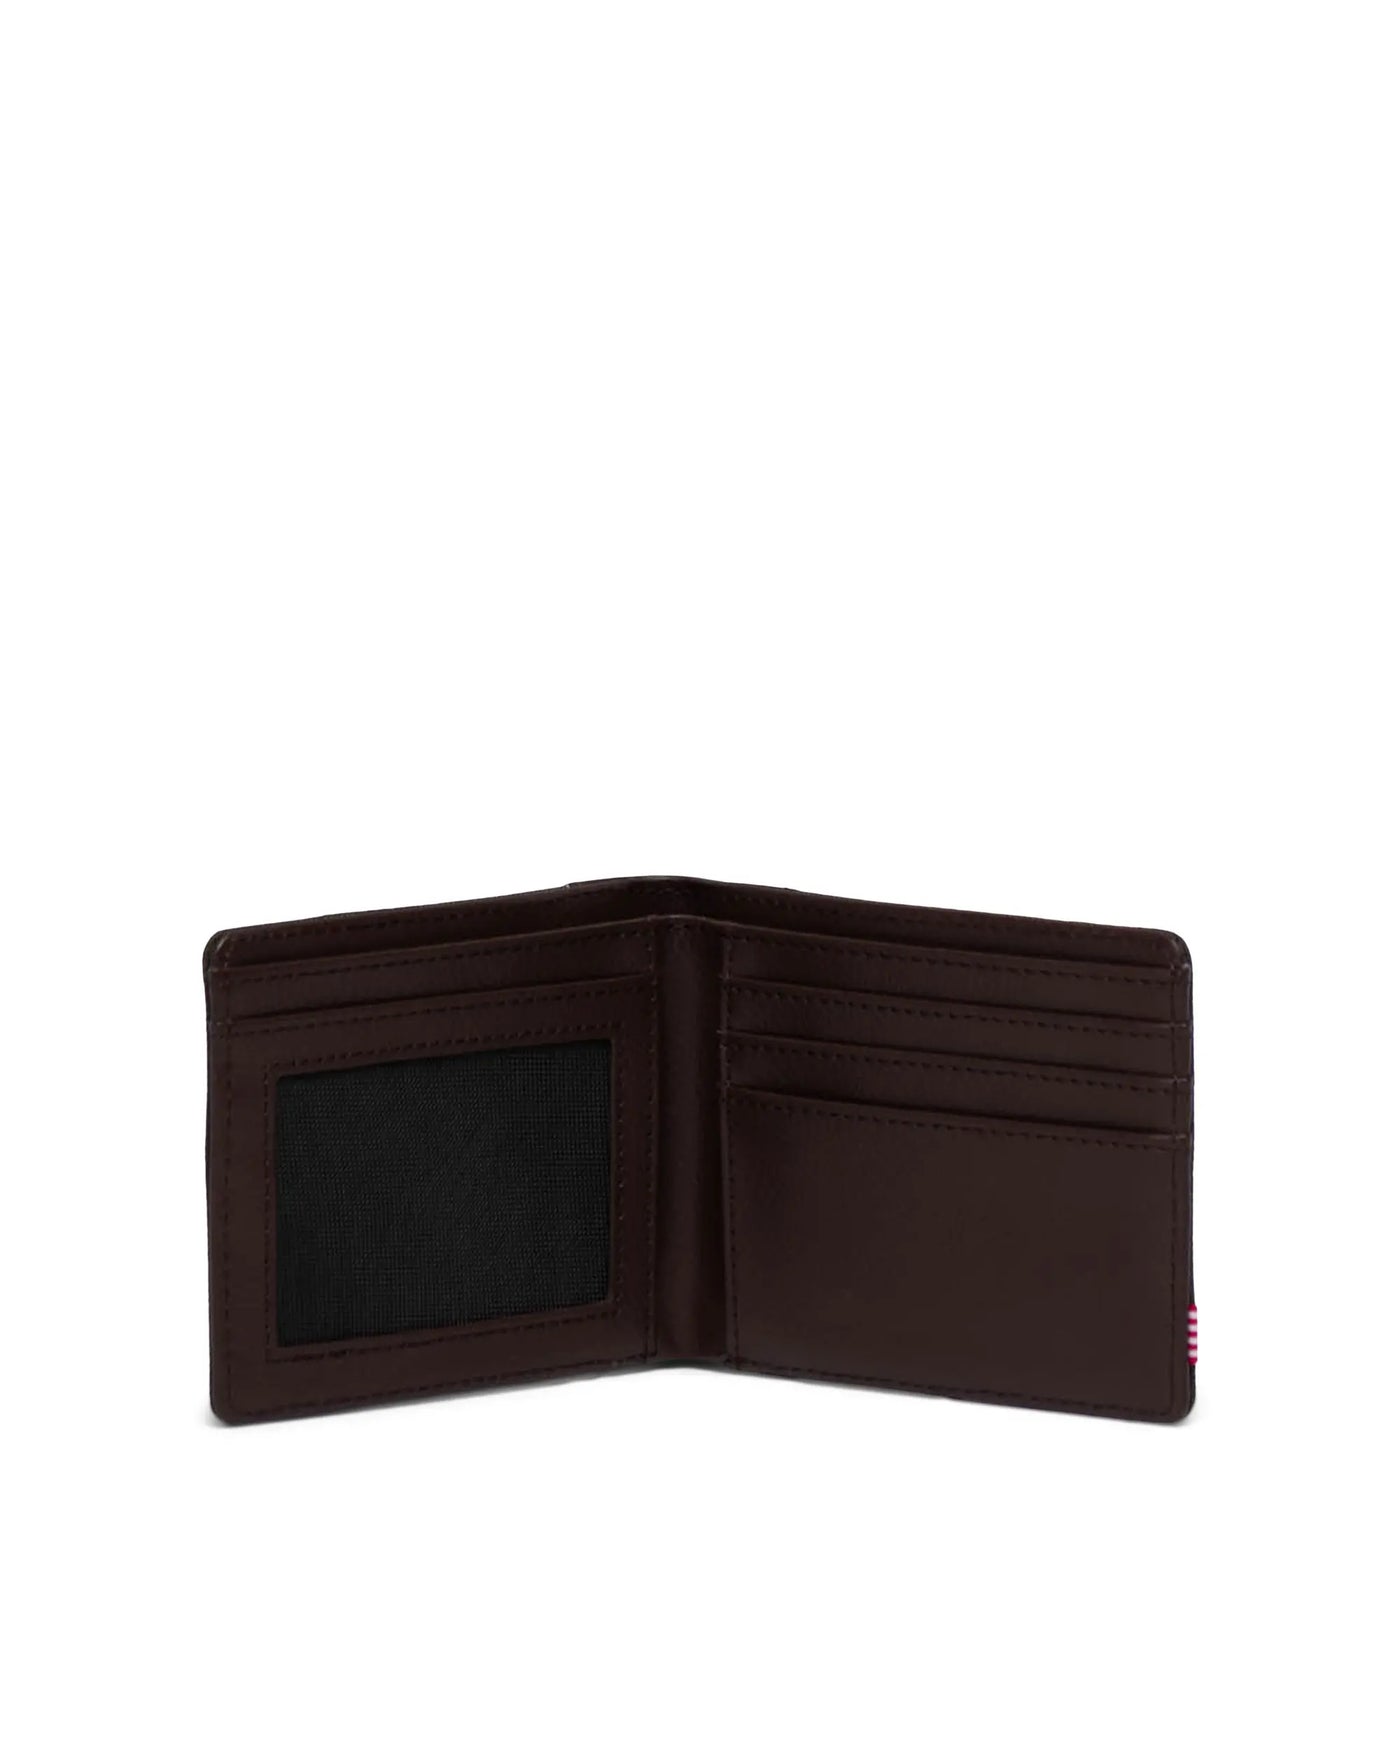 Hank Wallet - Ivy Green/ Chicory Coffee